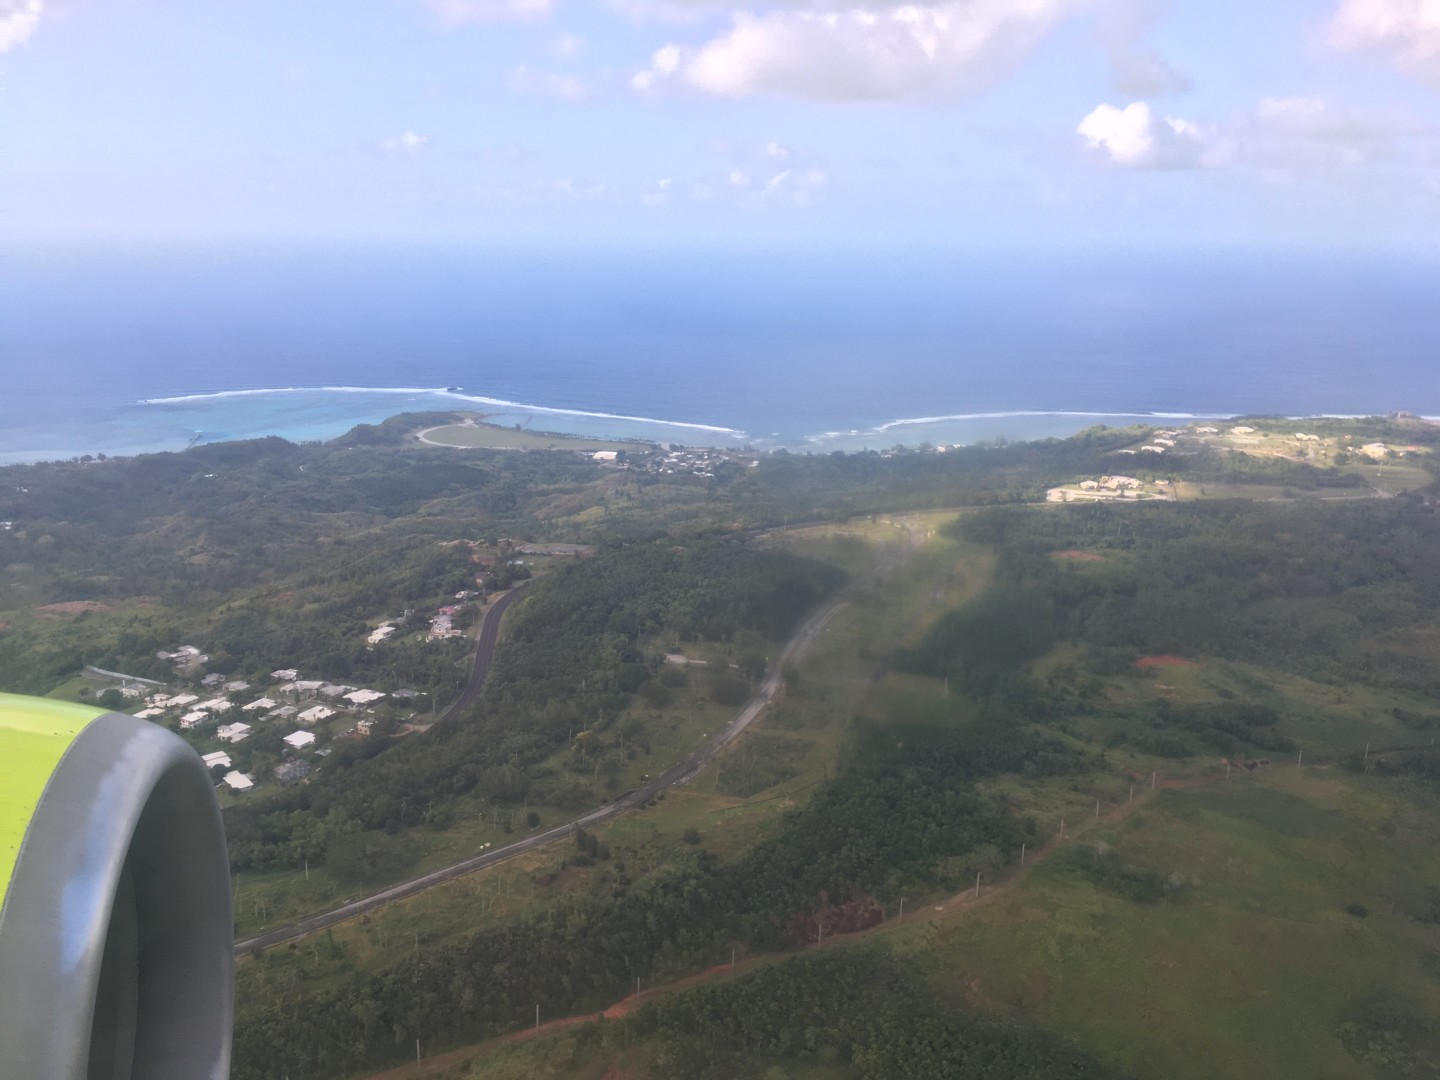 Guam from above